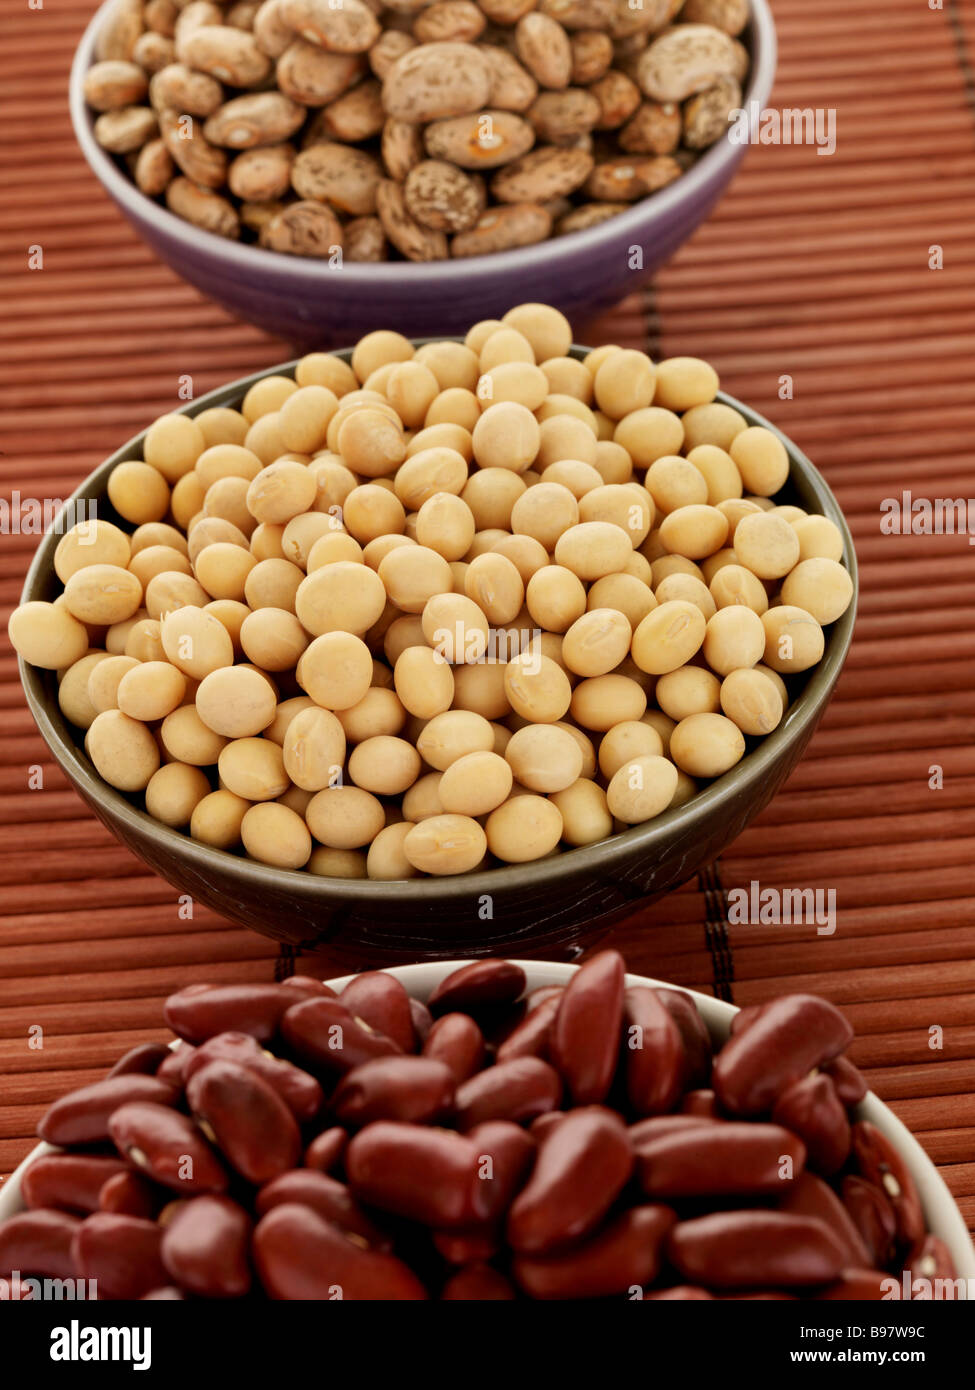 Bowls Of Healthy Mixed Dried Beans Cooking Ingredients With No People Stock Photo